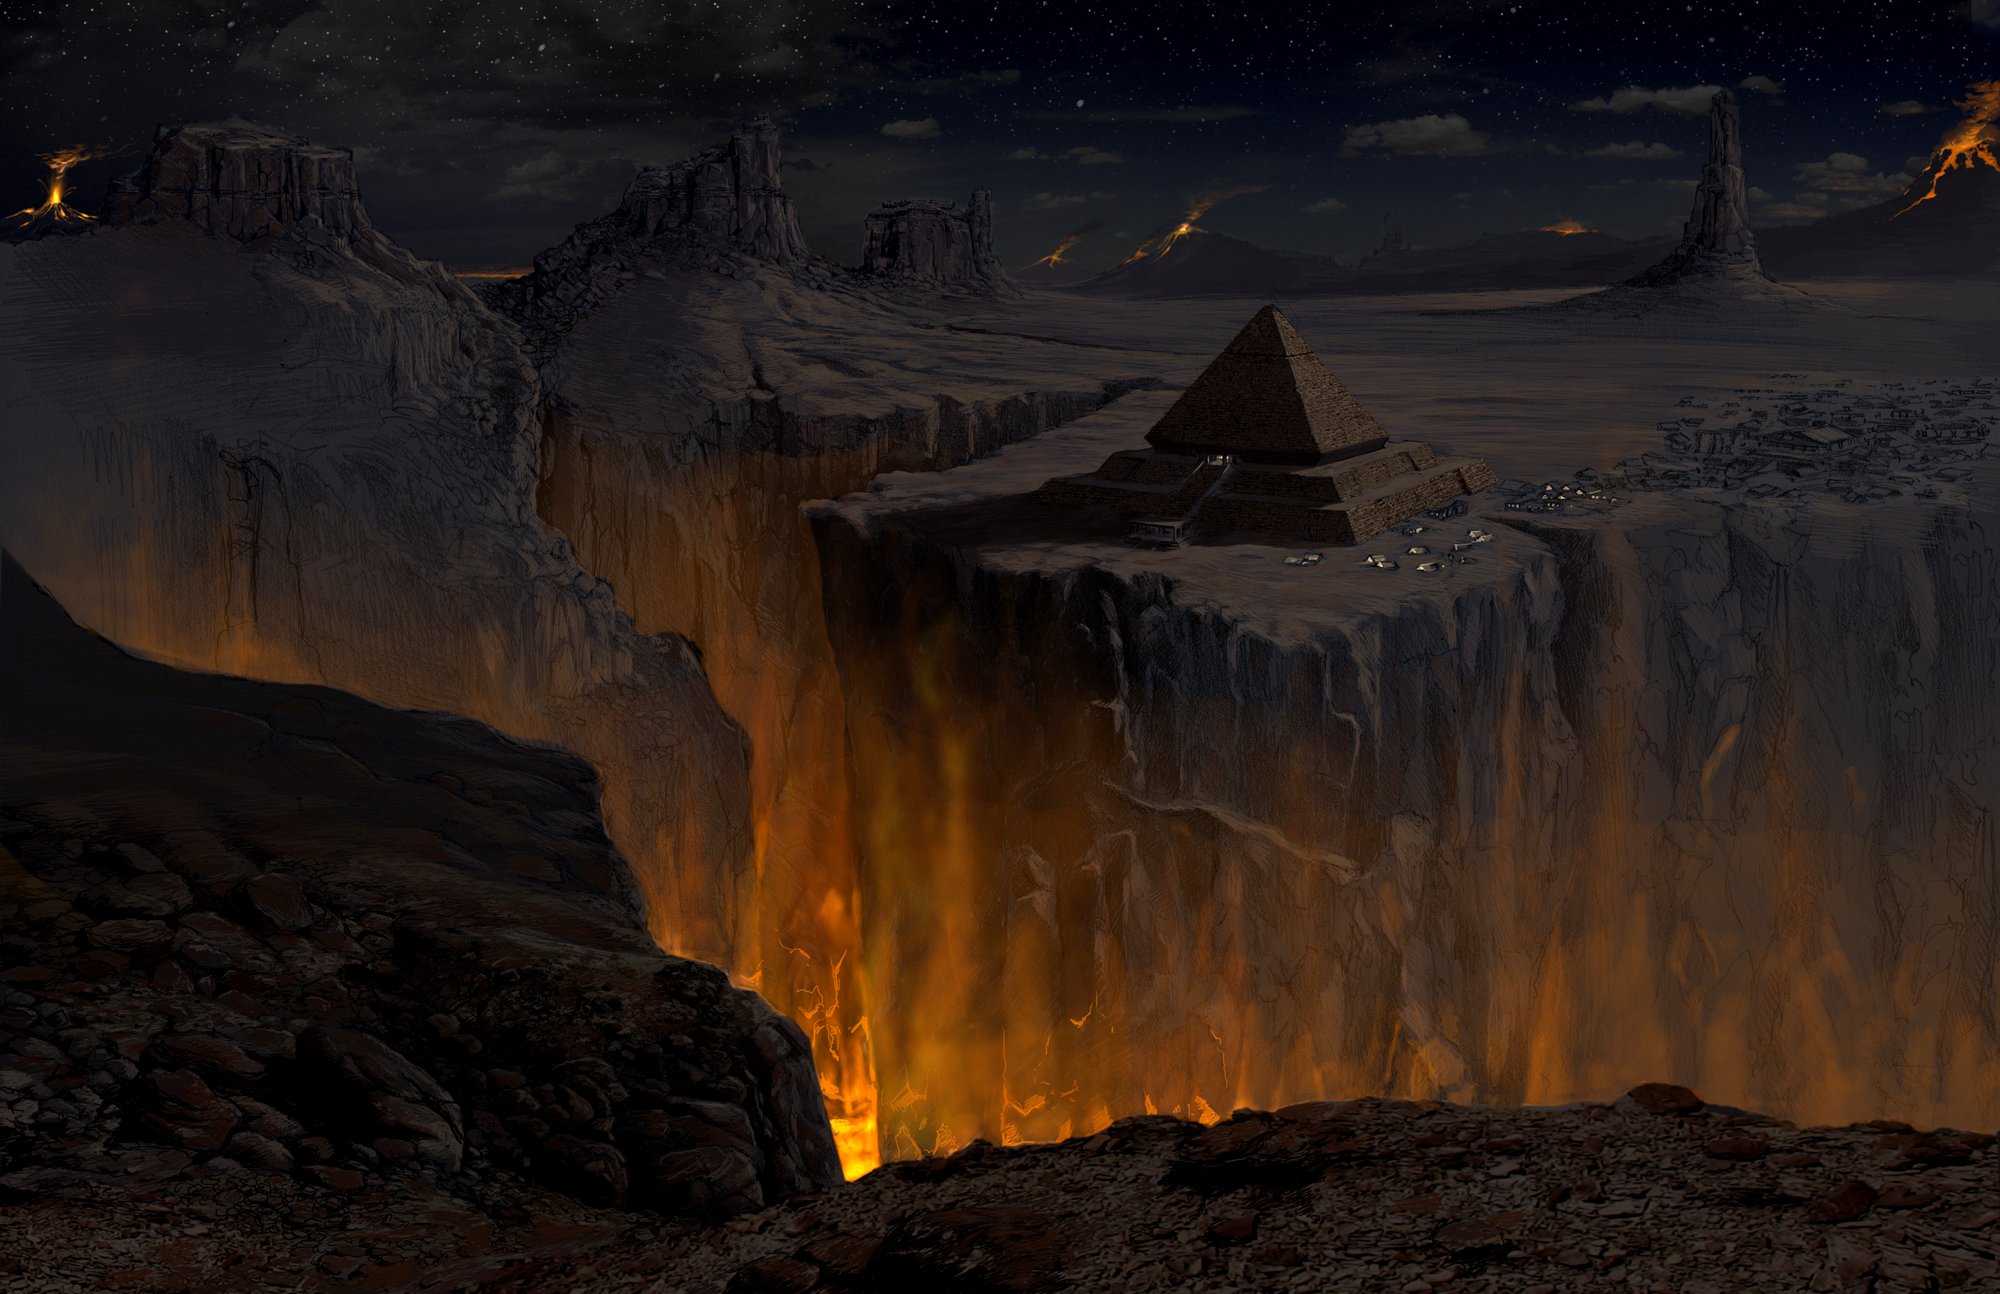 VFX matte of crumbling alien planet with Pyramid.